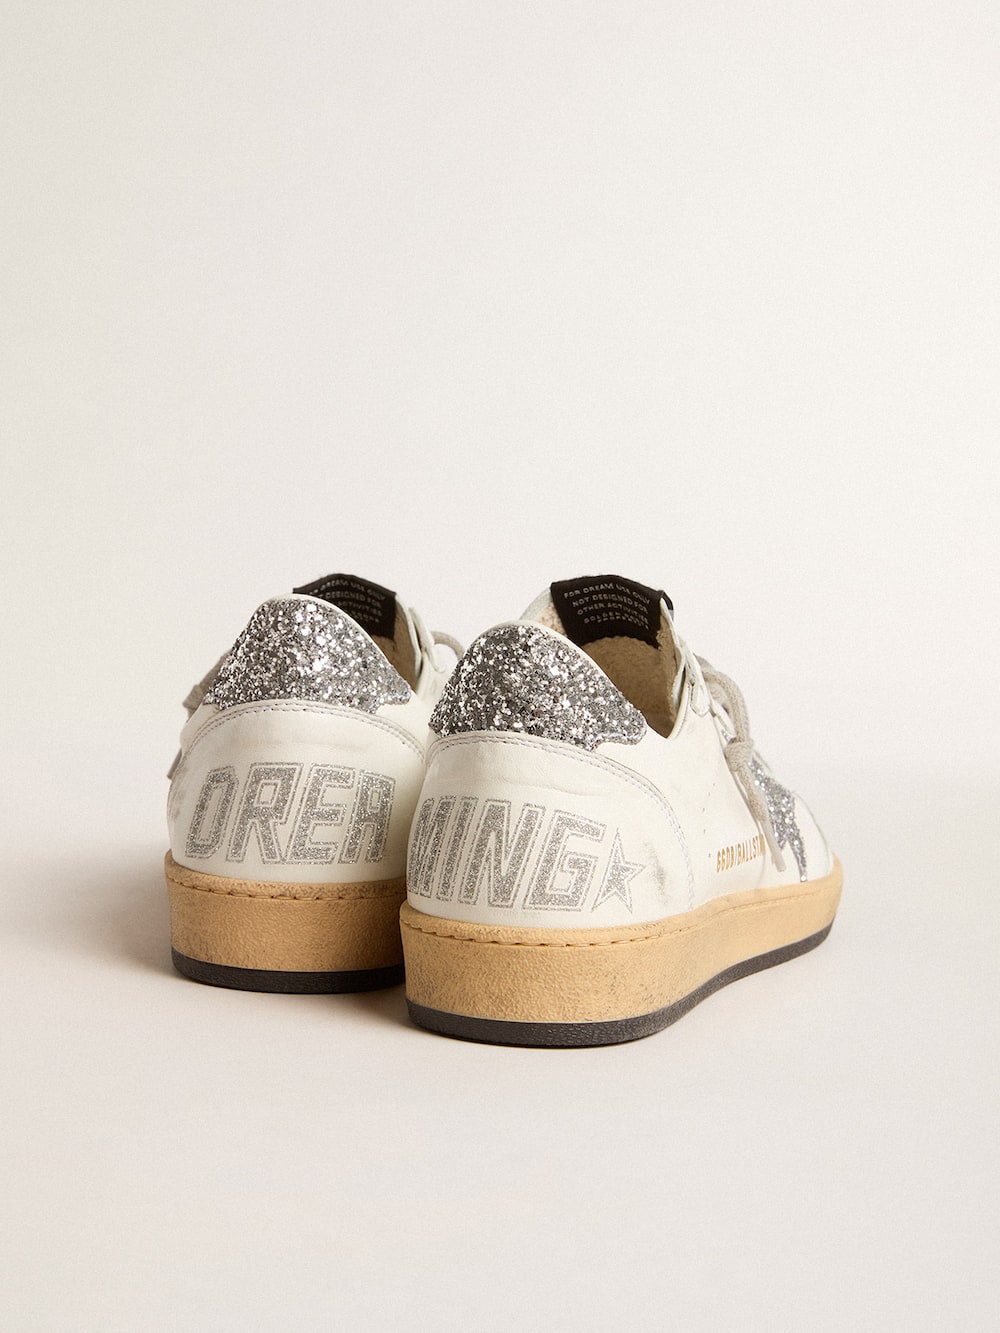 Golden Goose - Men’s Ball Star Wishes in nappa leather with glitter star and heel tab in 